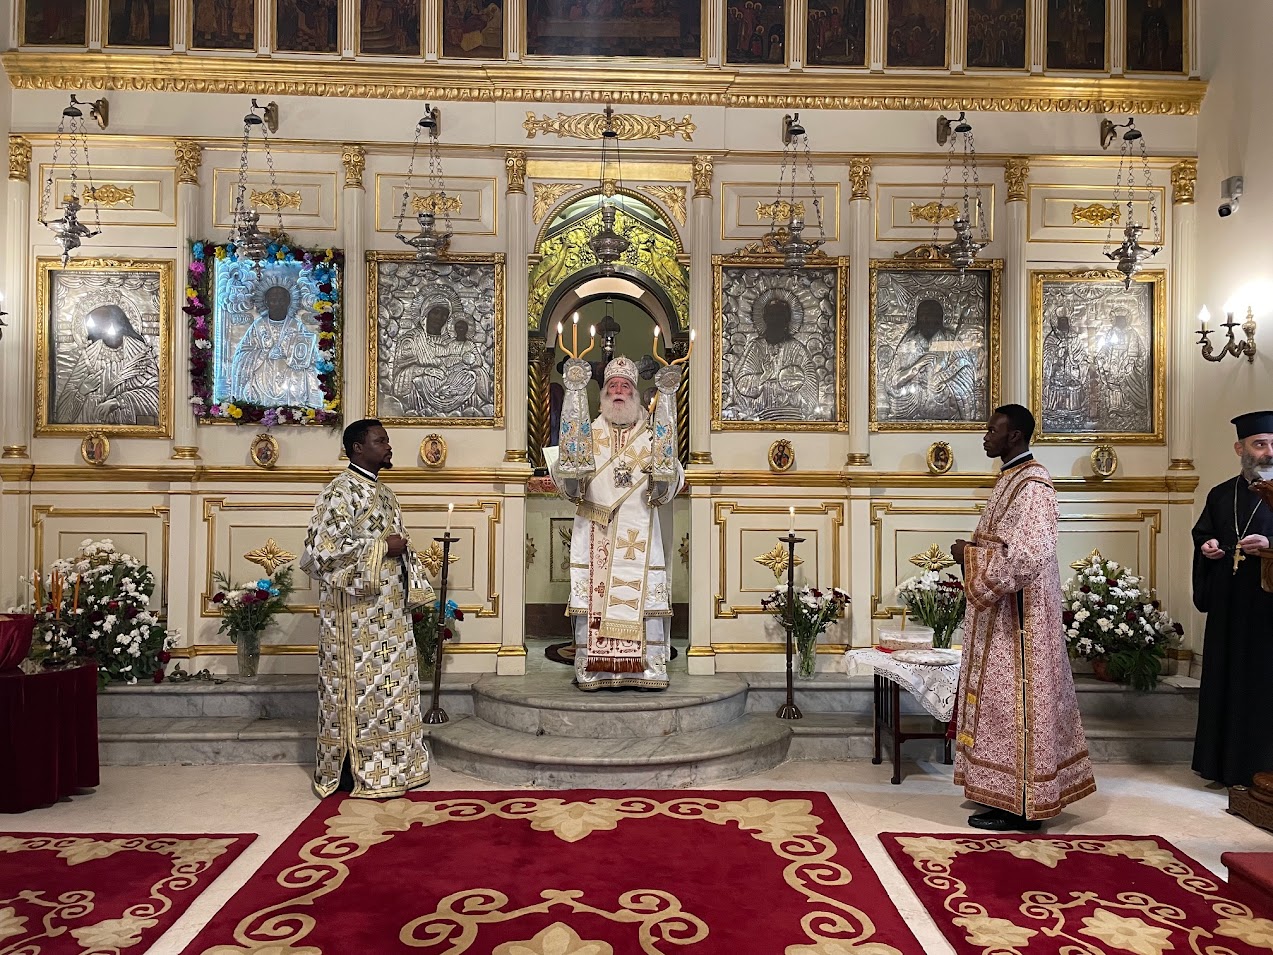 Patriarchal Divine Liturgy was celebrated at the Church of Saint Nicholas in Alexandria